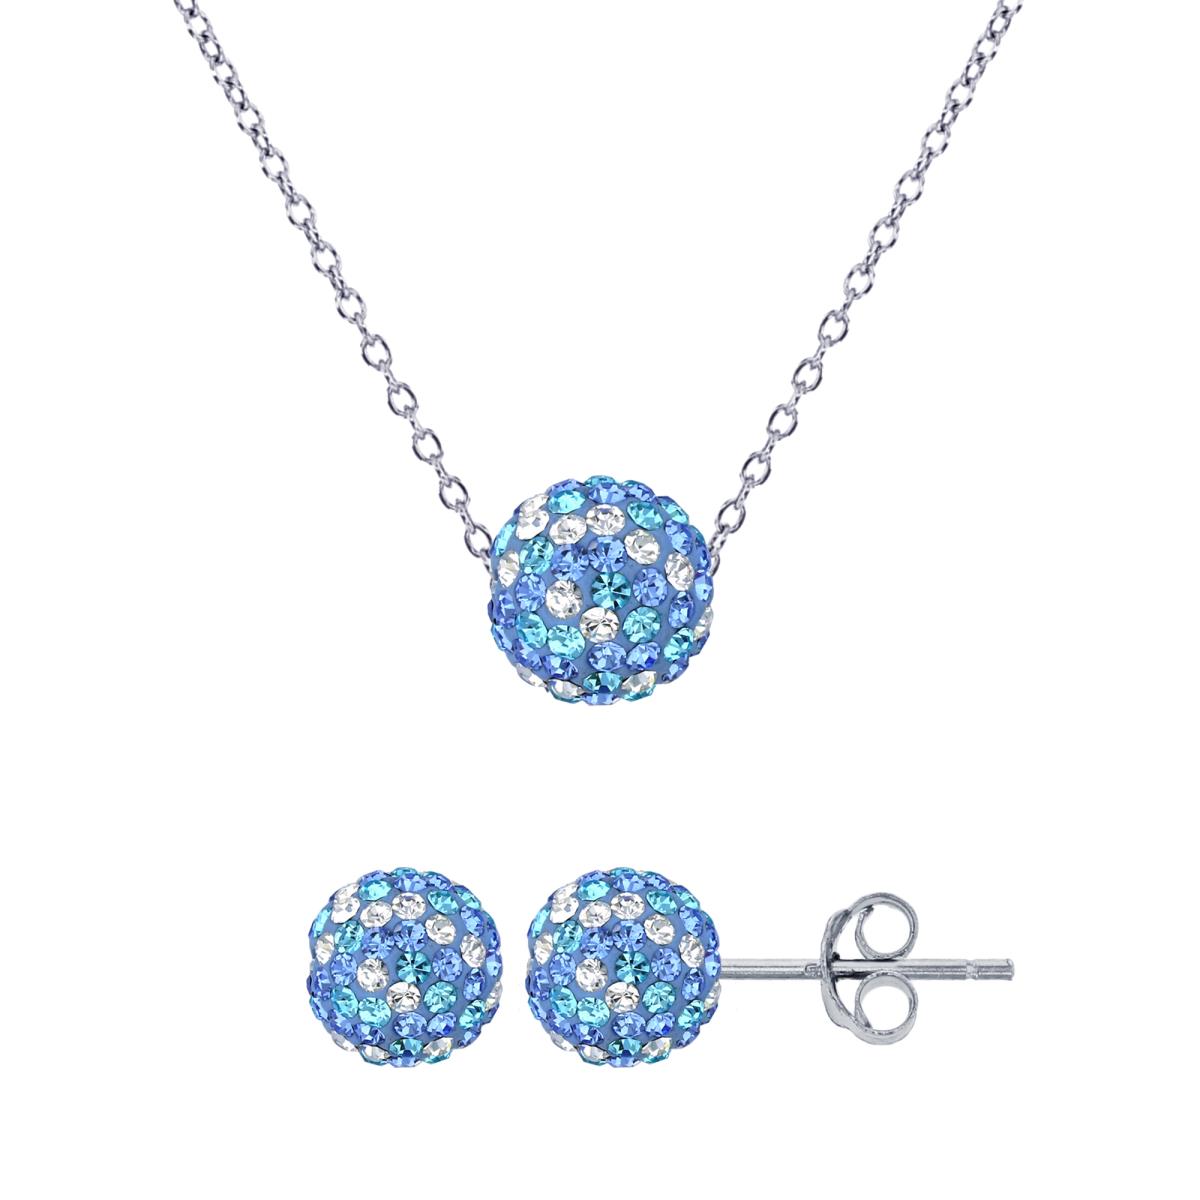 Sterling Silver Rhodium 6mm Aqua+Sapphire+White Crystal Fireball Bead Stud & 8mm 18" Ecoated Necklace Set